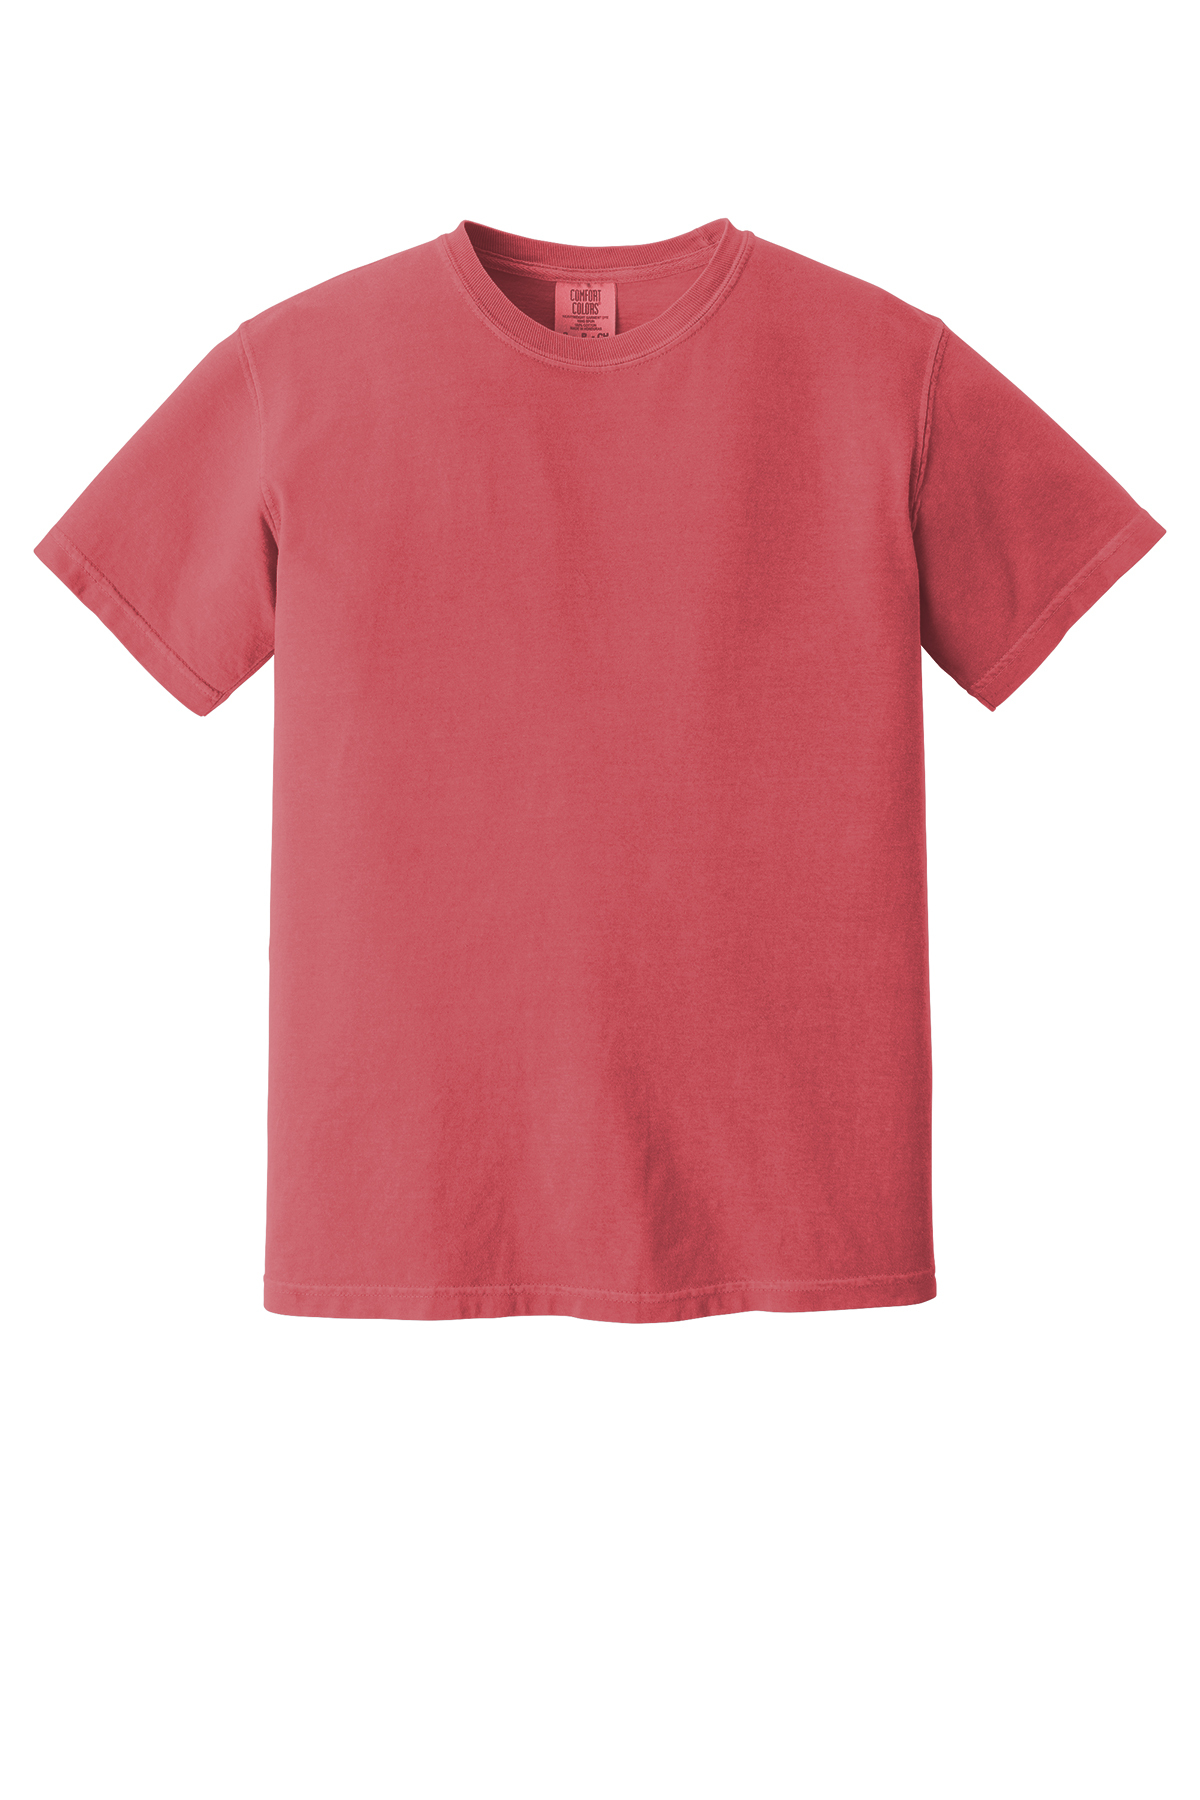 Comfort Colors Heavyweight Ring Spun Tee | Product | Online Apparel Market